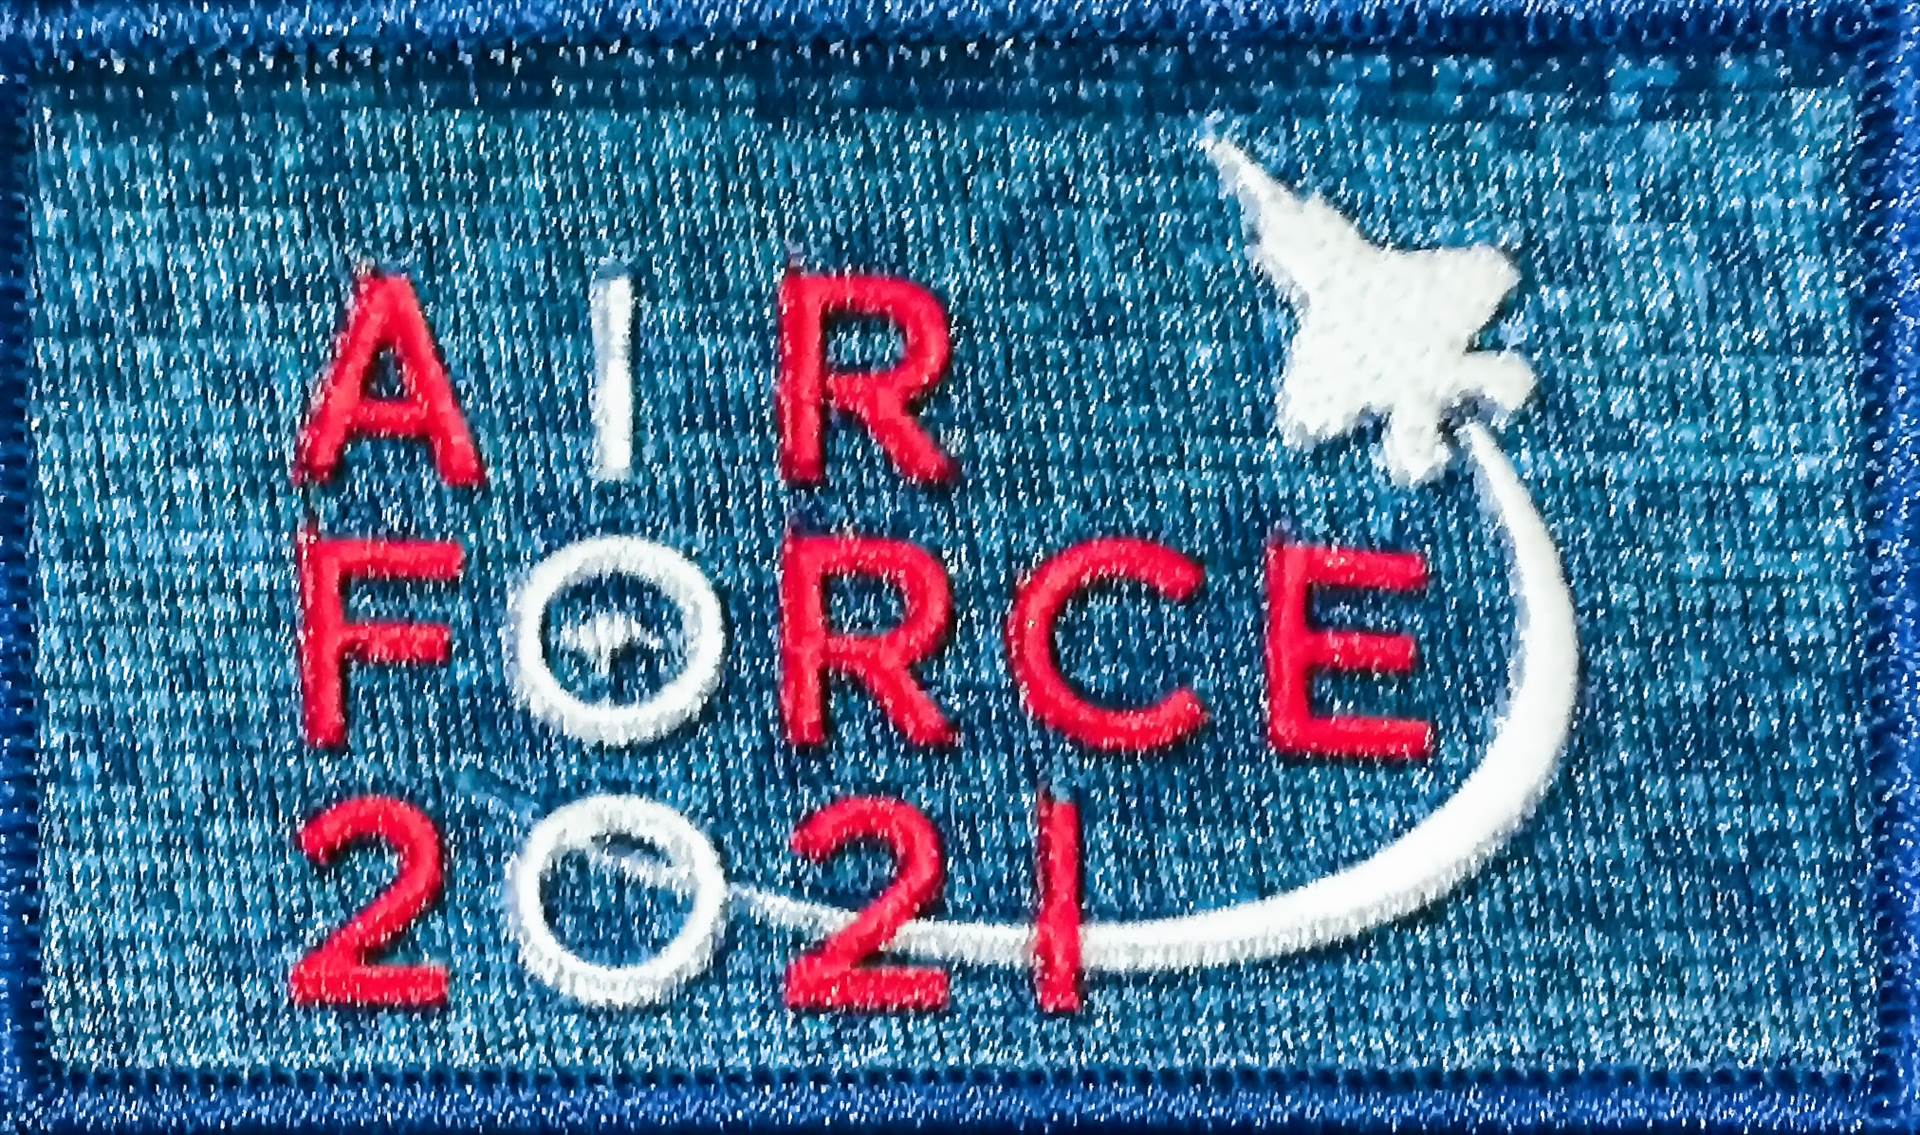 Air Force 2021 Patch Air Force 2021 Patch by johntorcasio